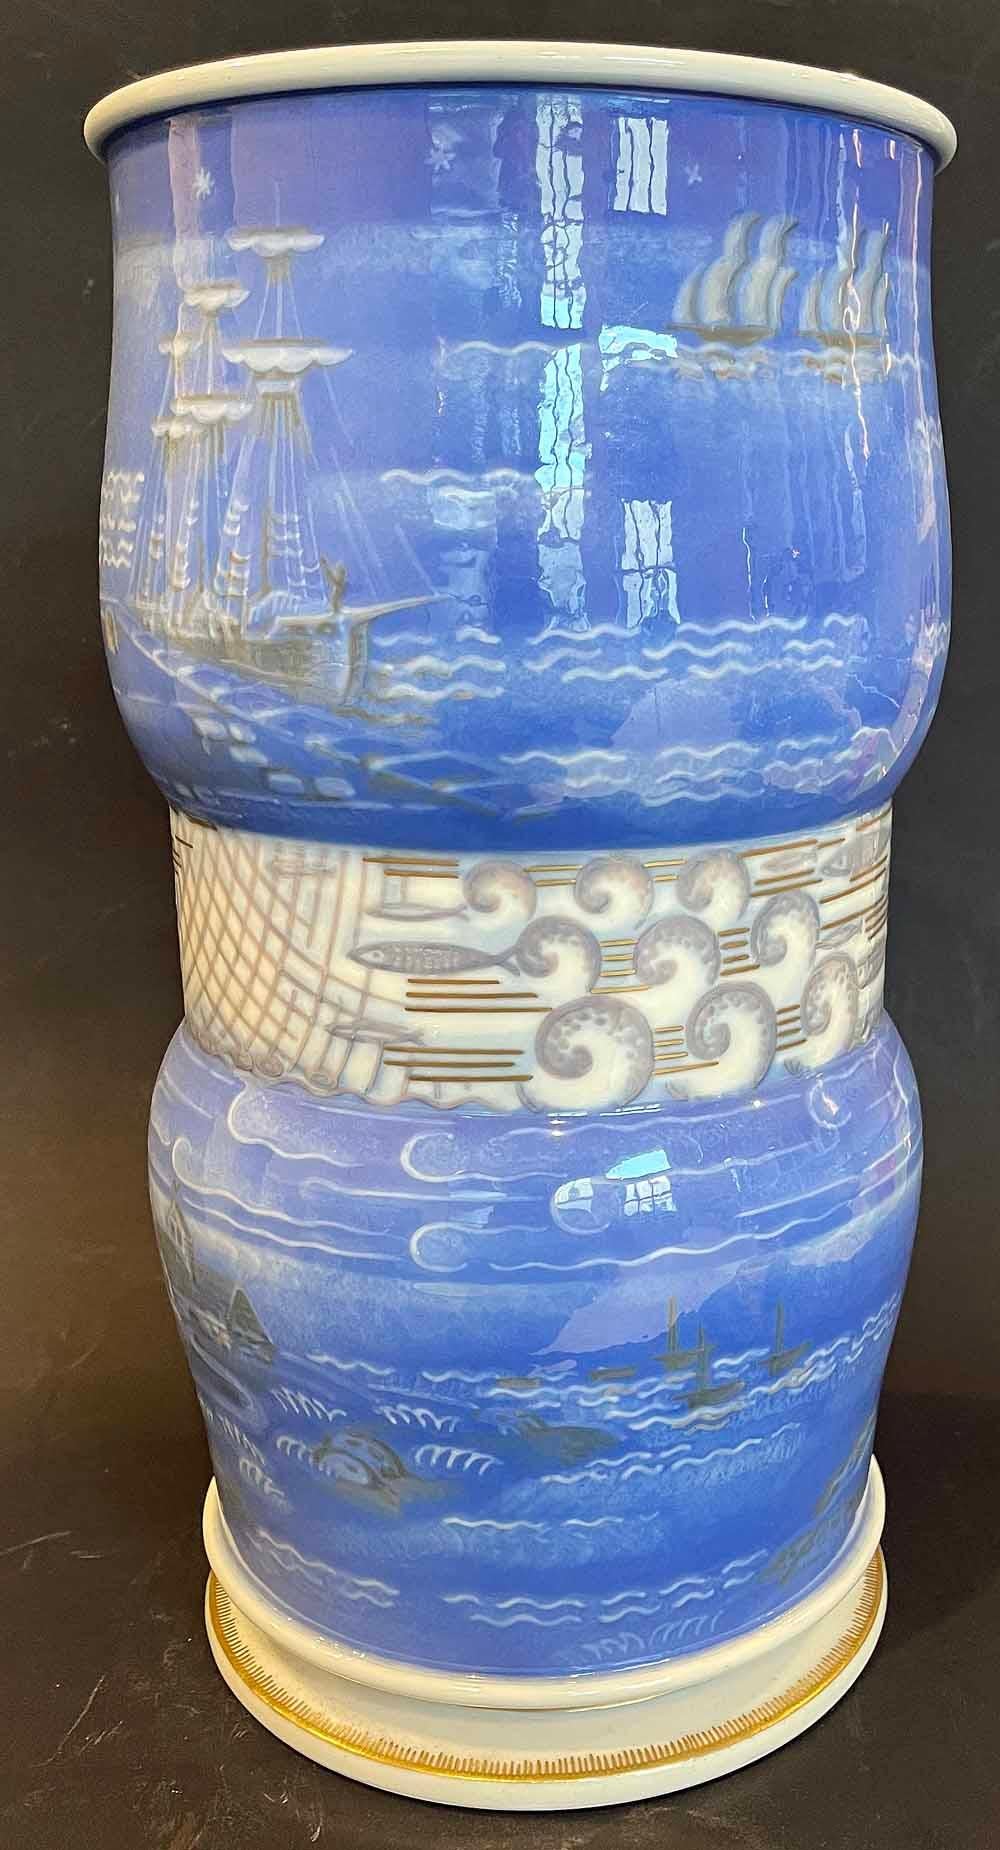 One of the finest pieces of Art Deco porcelain we have ever seen, and probably the greatest work ever executed by Adrien Leduc for Sevres, this large double-gourd vase depicts in great detail scenes from the life of a Breton village along the sea.